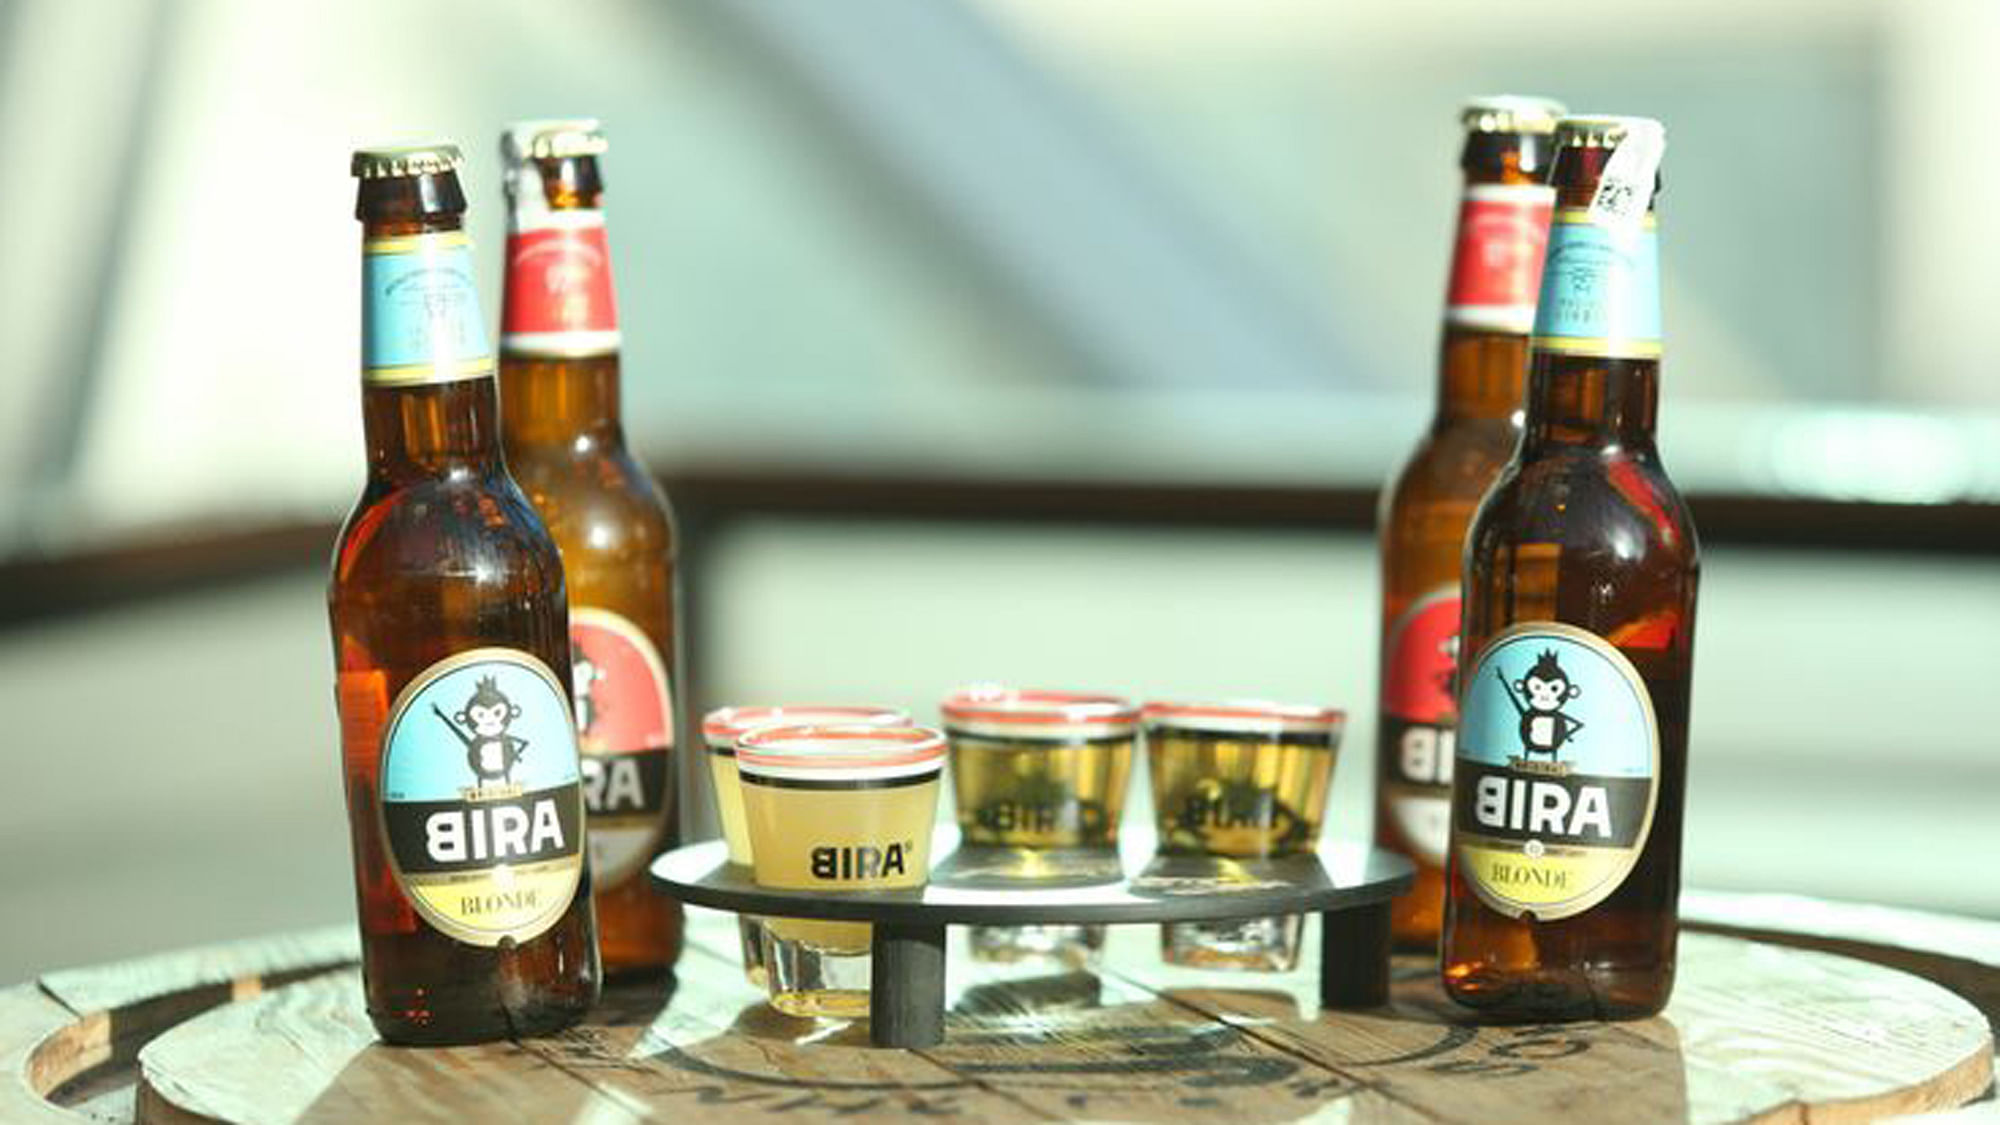 Bira will launch in New York in the first quarter of the year. (Photo Courtesy: Pinterest)